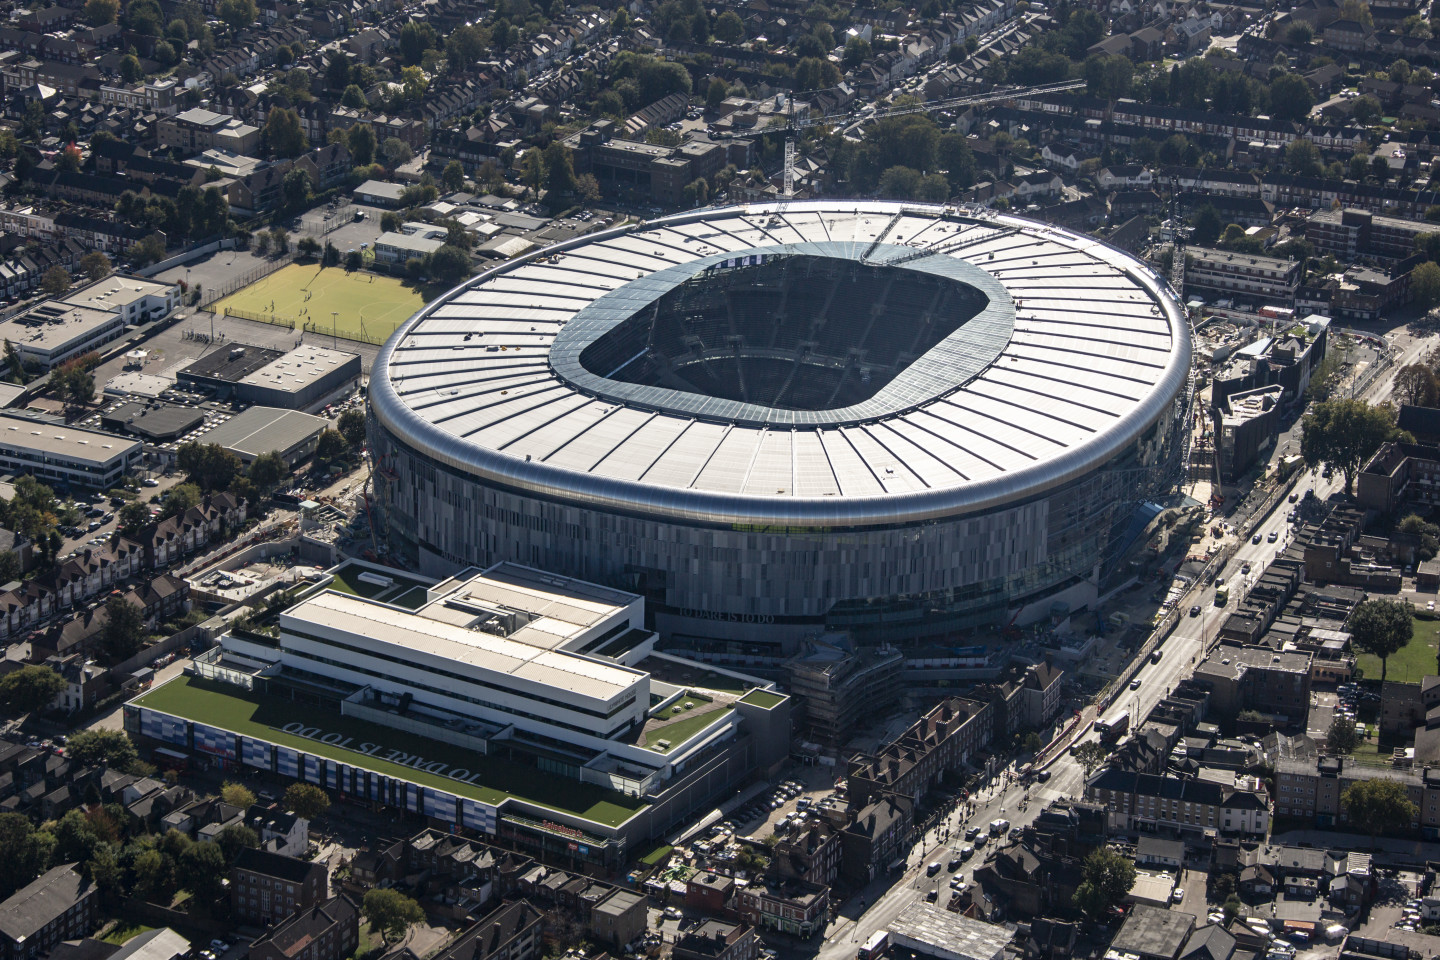 Tottenham tickets: How to get Spurs tickets for the Tottenham